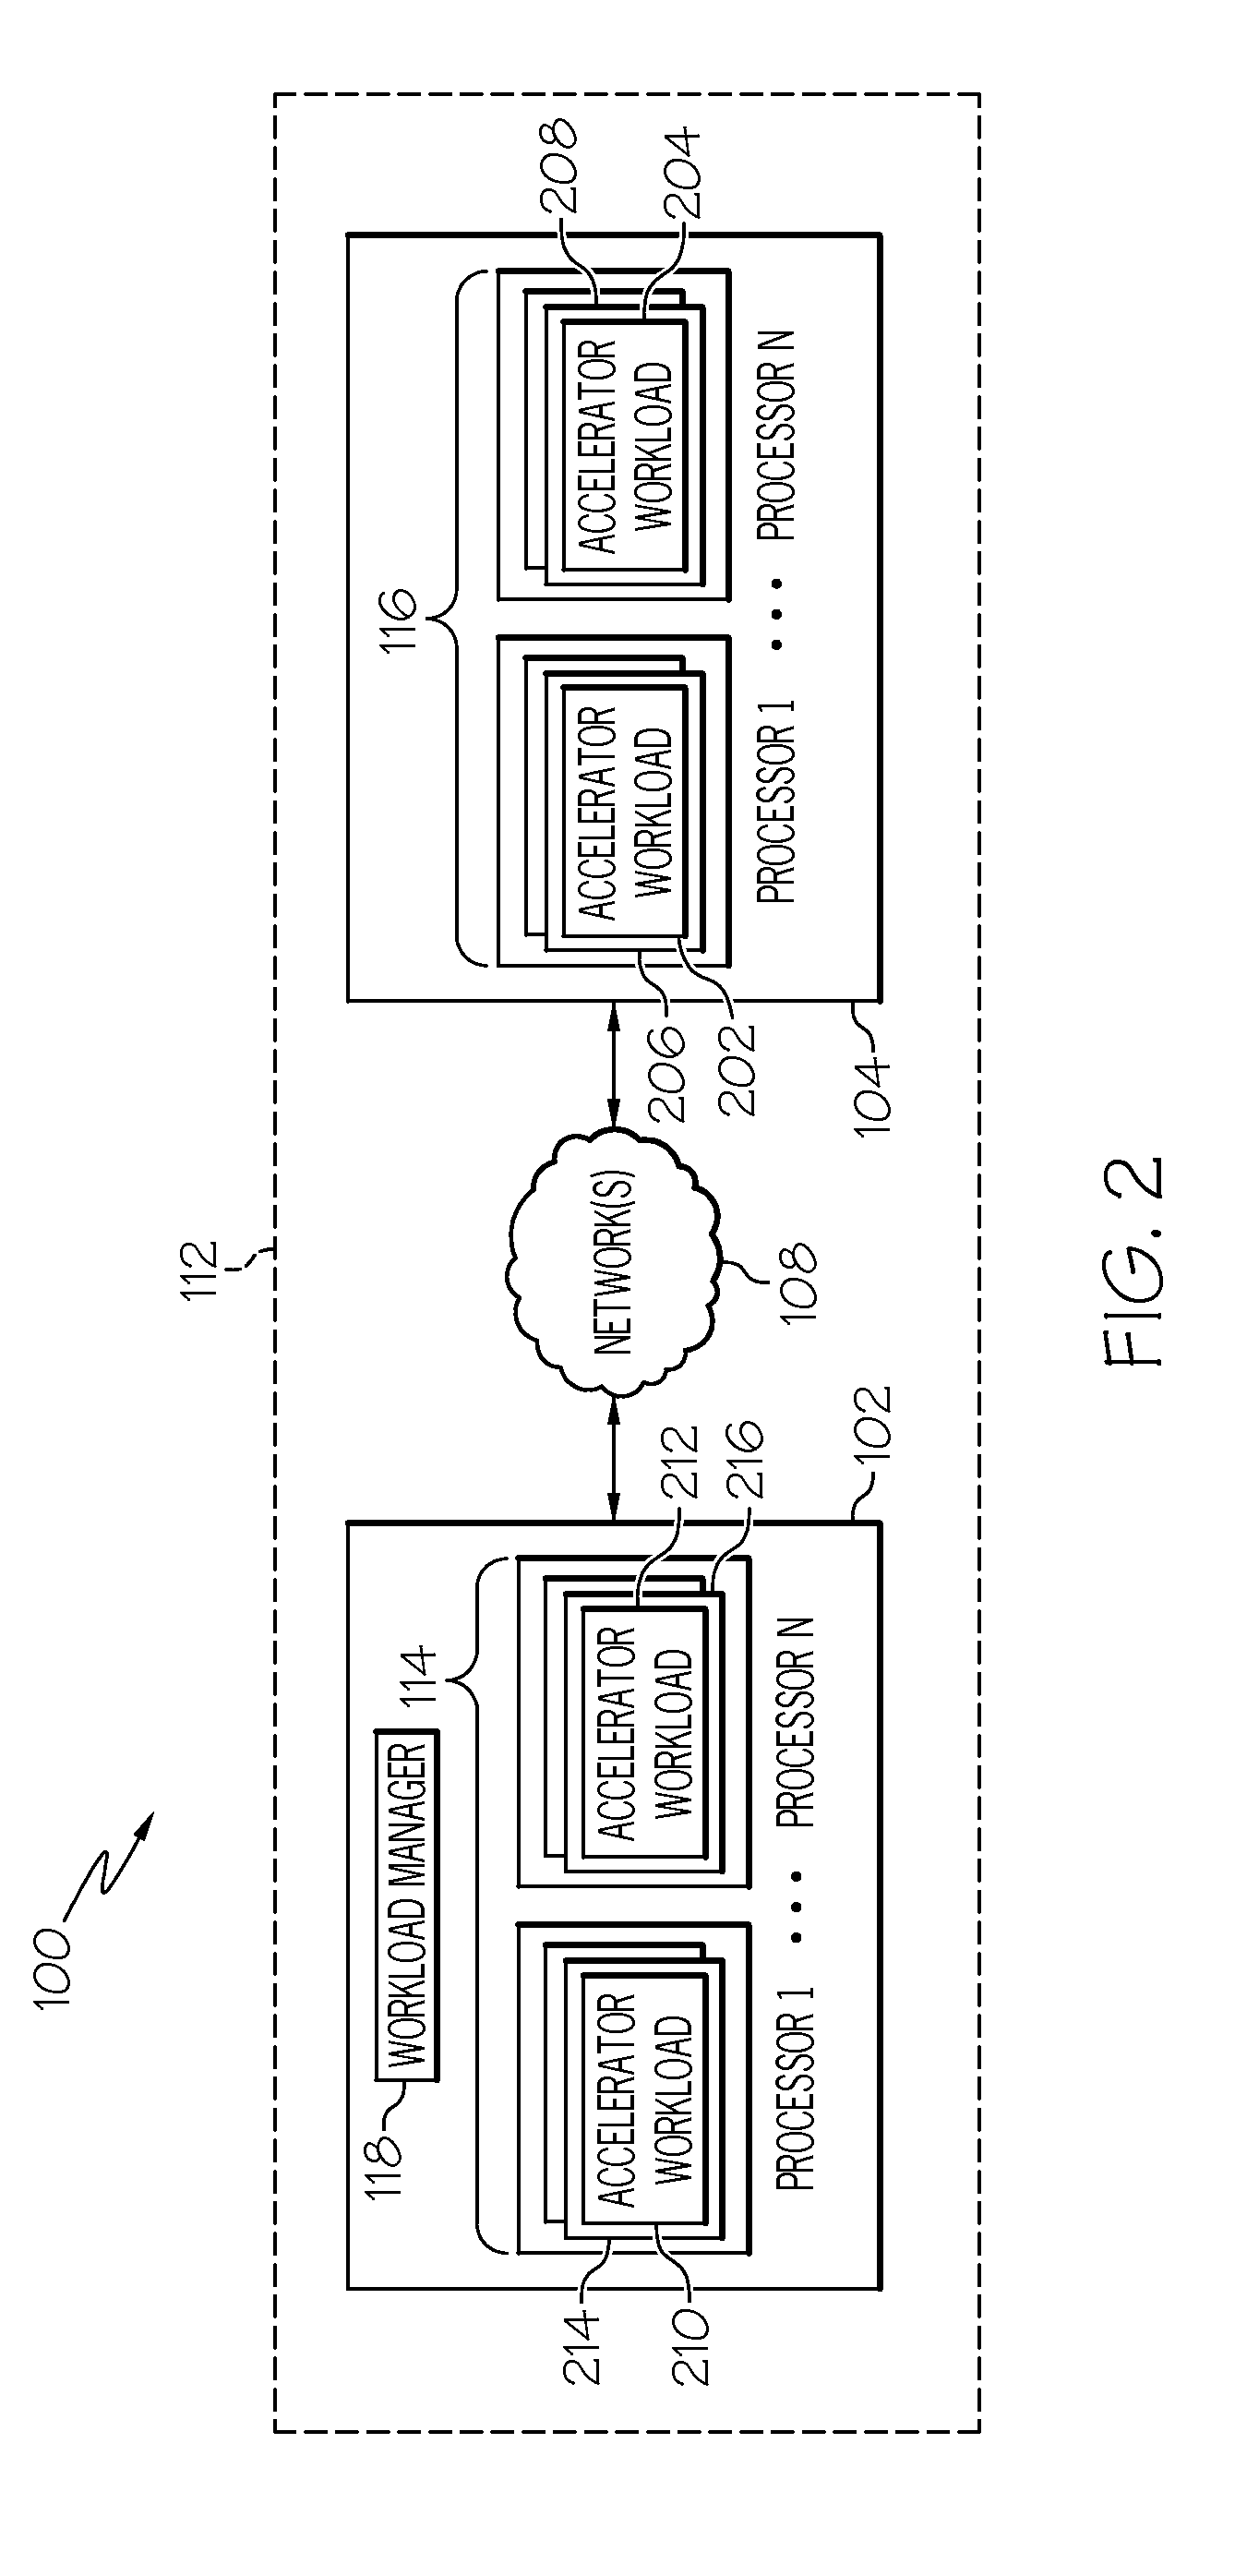 Rescheduling workload in a hybrid computing environment